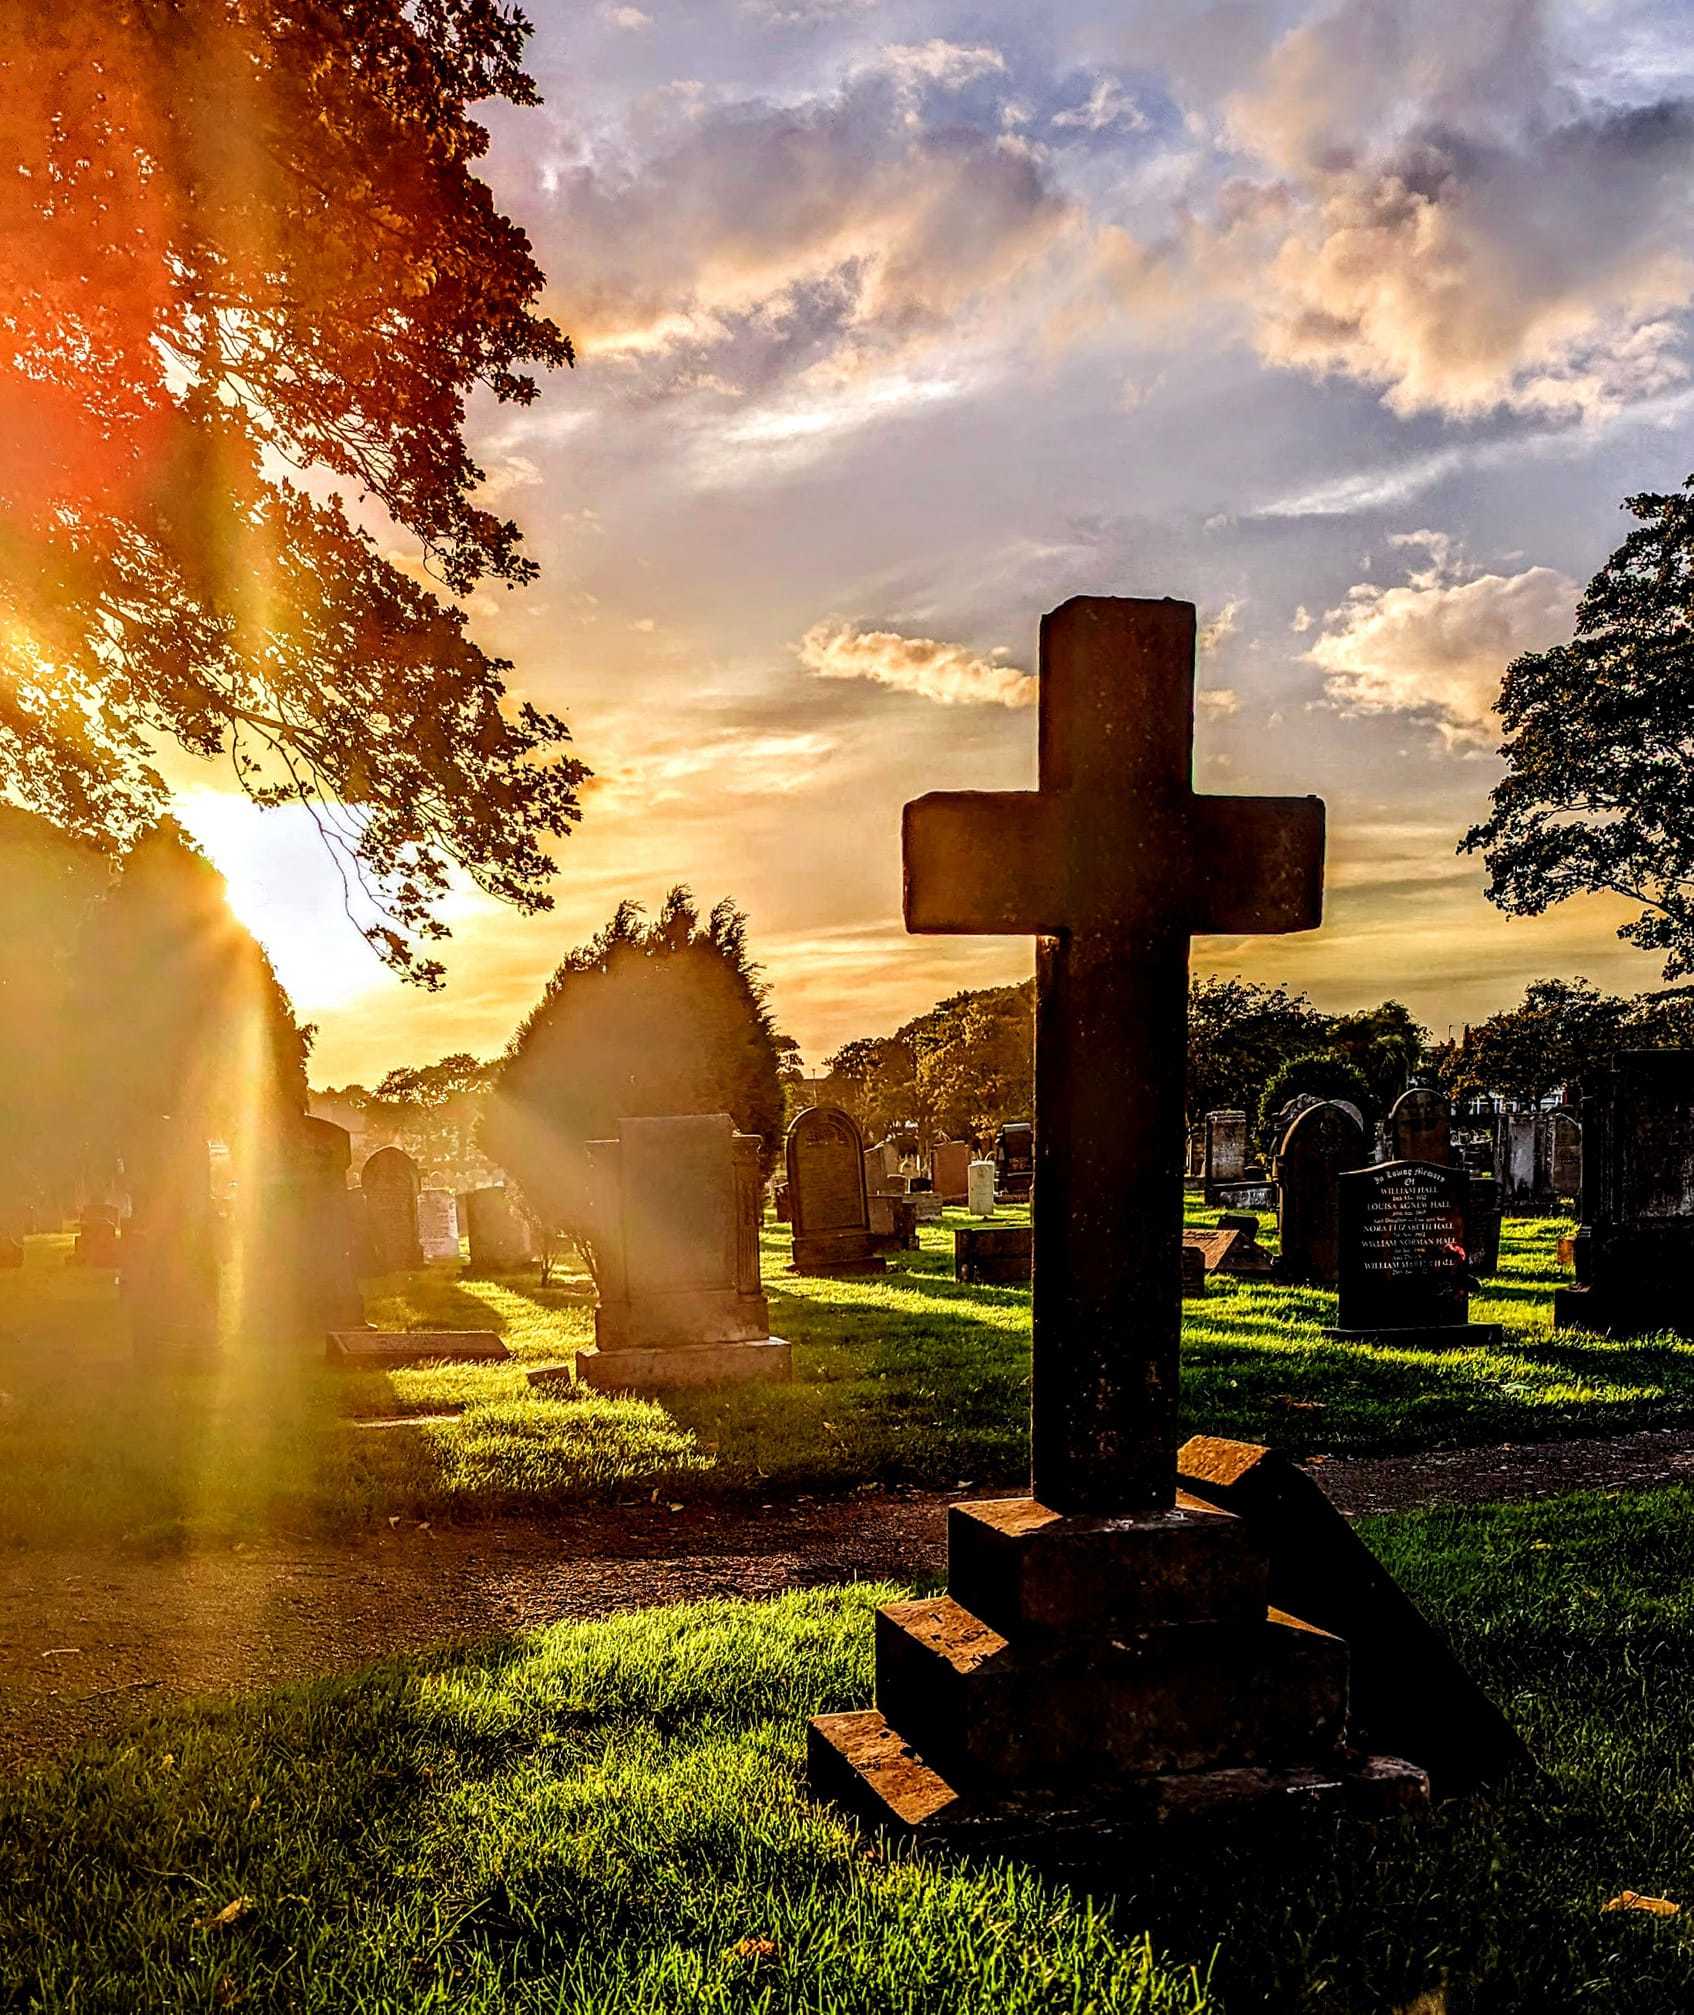 Sunset at Wallasey cemetery by Kimberley Phillips